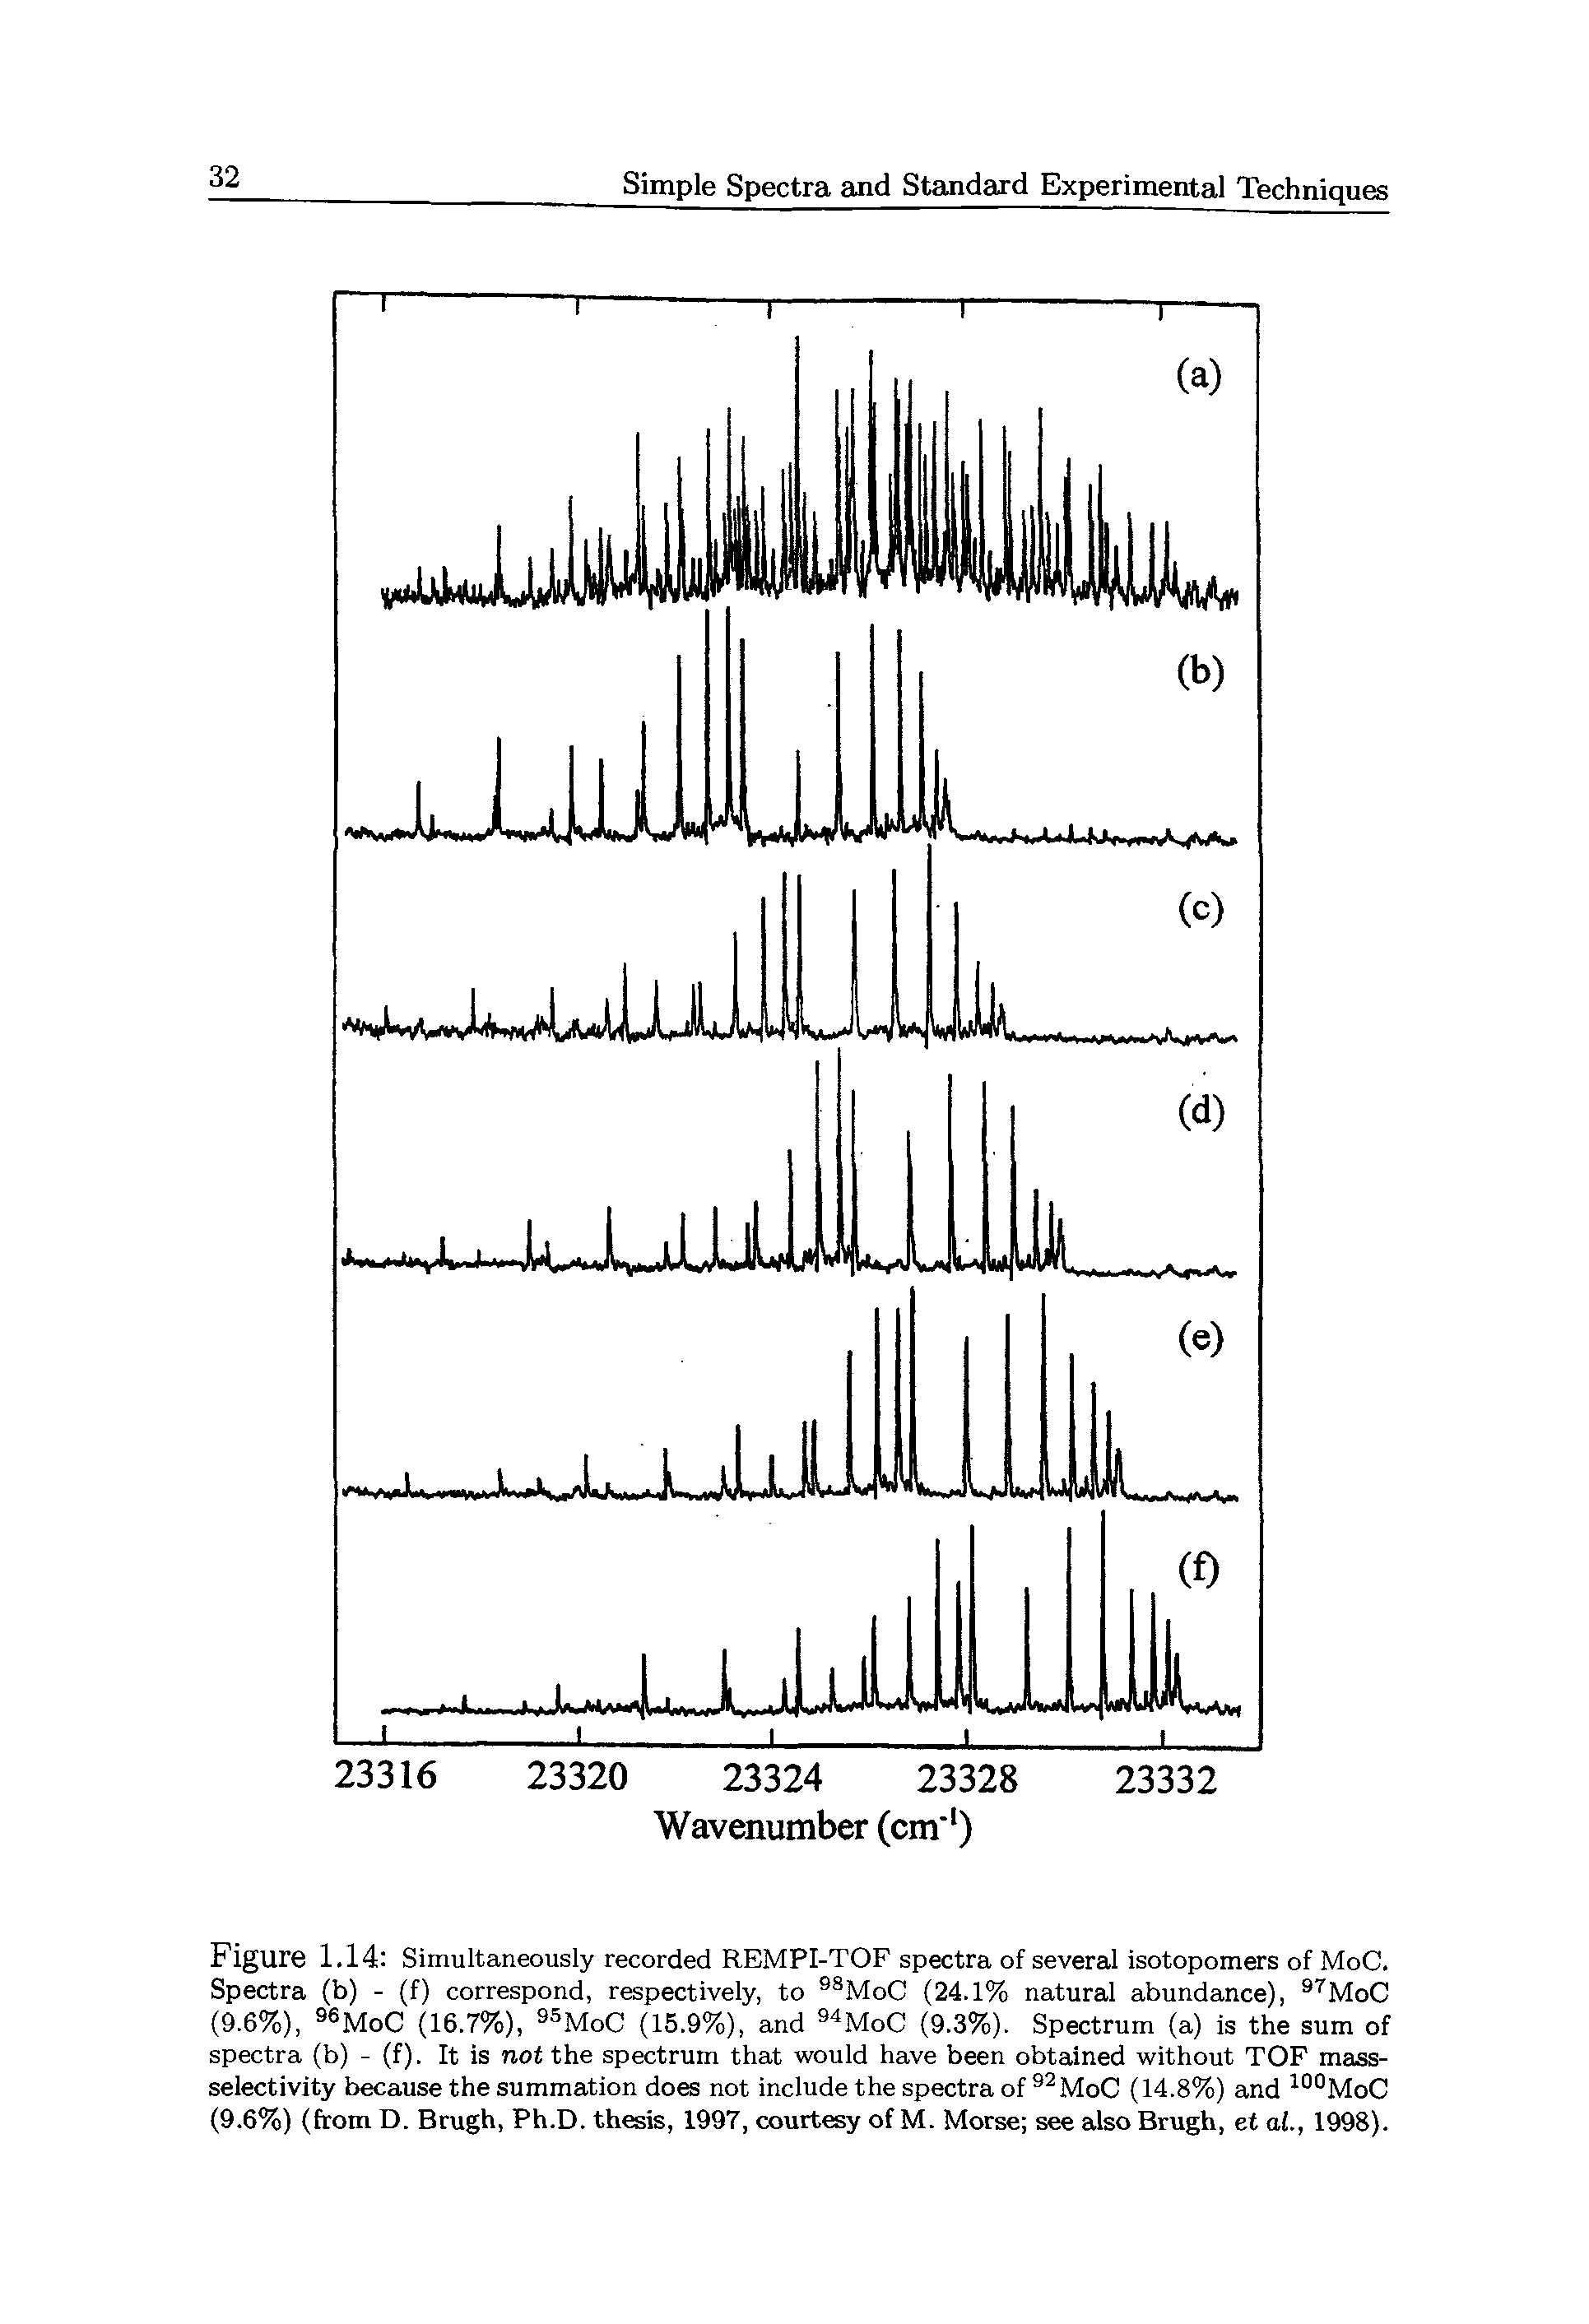 Figure 1.14 Simultaneously recorded REMPI-TOF spectra of several isotopomers of MoC. Spectra (b) - (f) correspond, respectively, to 98MoC (24.1% natural abundance), 97MoC (9.6%), 96MoC (16.7%), 9SMoC (15.9%), and 94MoC (9.3%). Spectrum (a) is the sum of spectra (b) - (f). It is not the spectrum that would have been obtained without TOF mass-selectivity because the summation does not include the spectra of 92MoC (14.8%) and 100MoC (9.6%) (from D. Brugh, Ph.D. thesis, 1997, courtesy of M. Morse see also Brugh, et at., 1998).